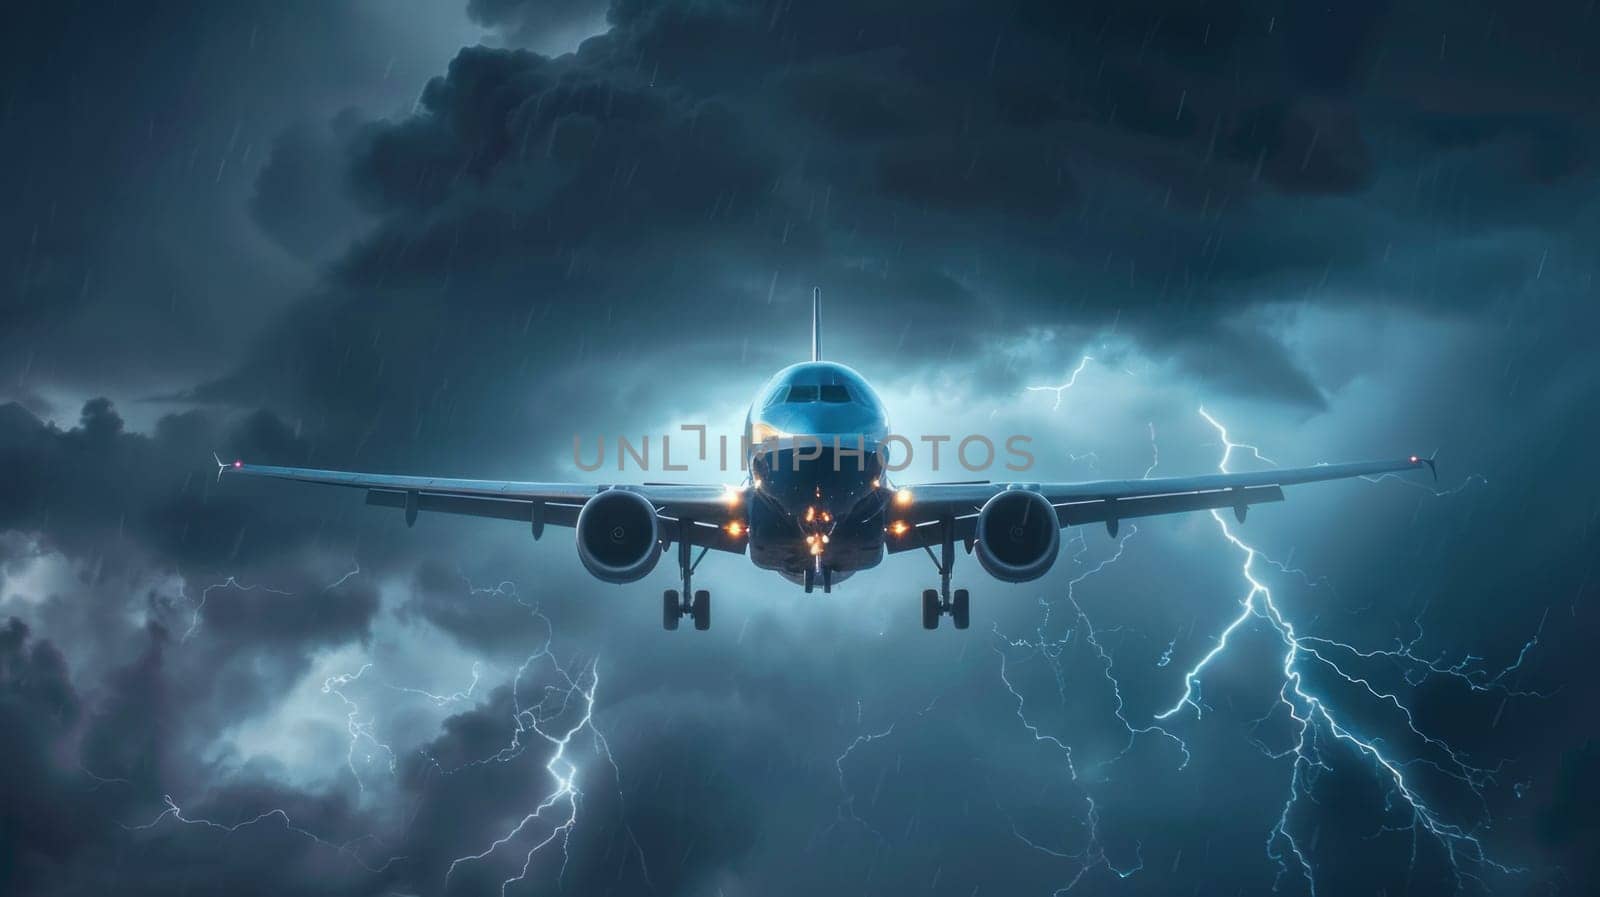 A plane is flying through a stormy sky.